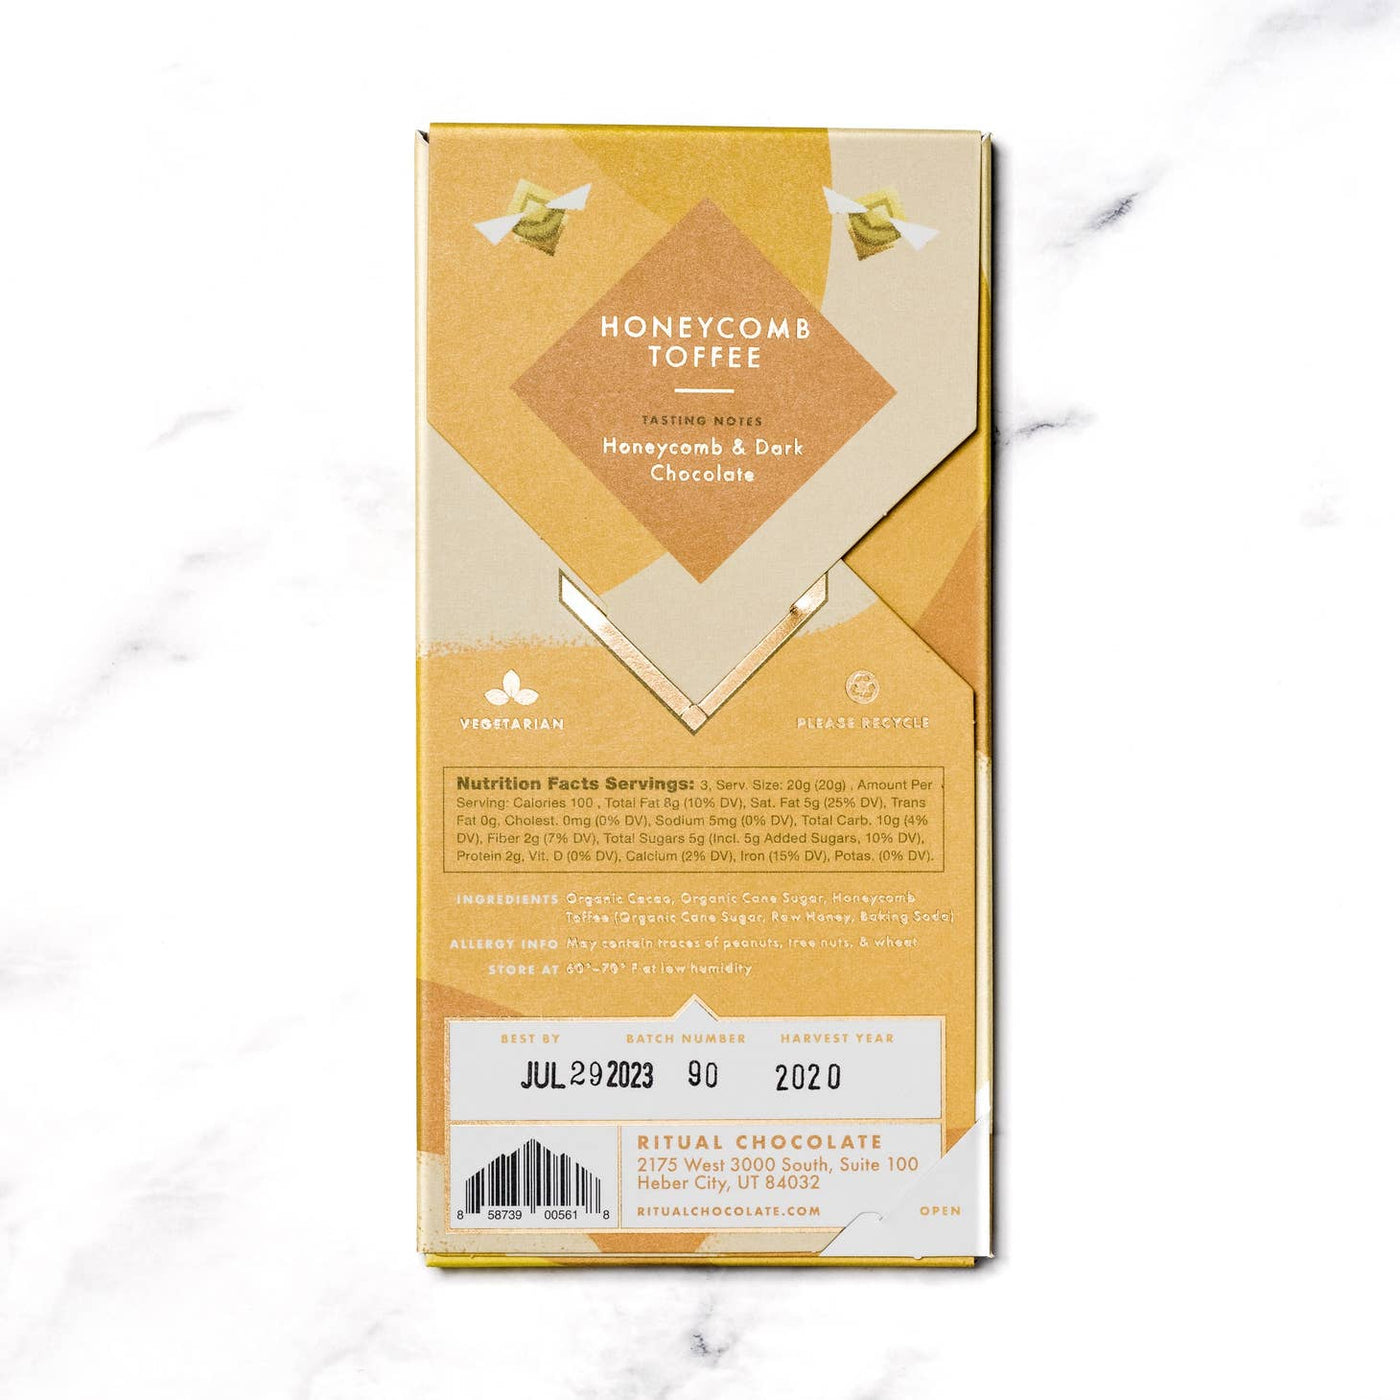 Honeycomb Toffee, 75% Cacao by Ritual Chocolate